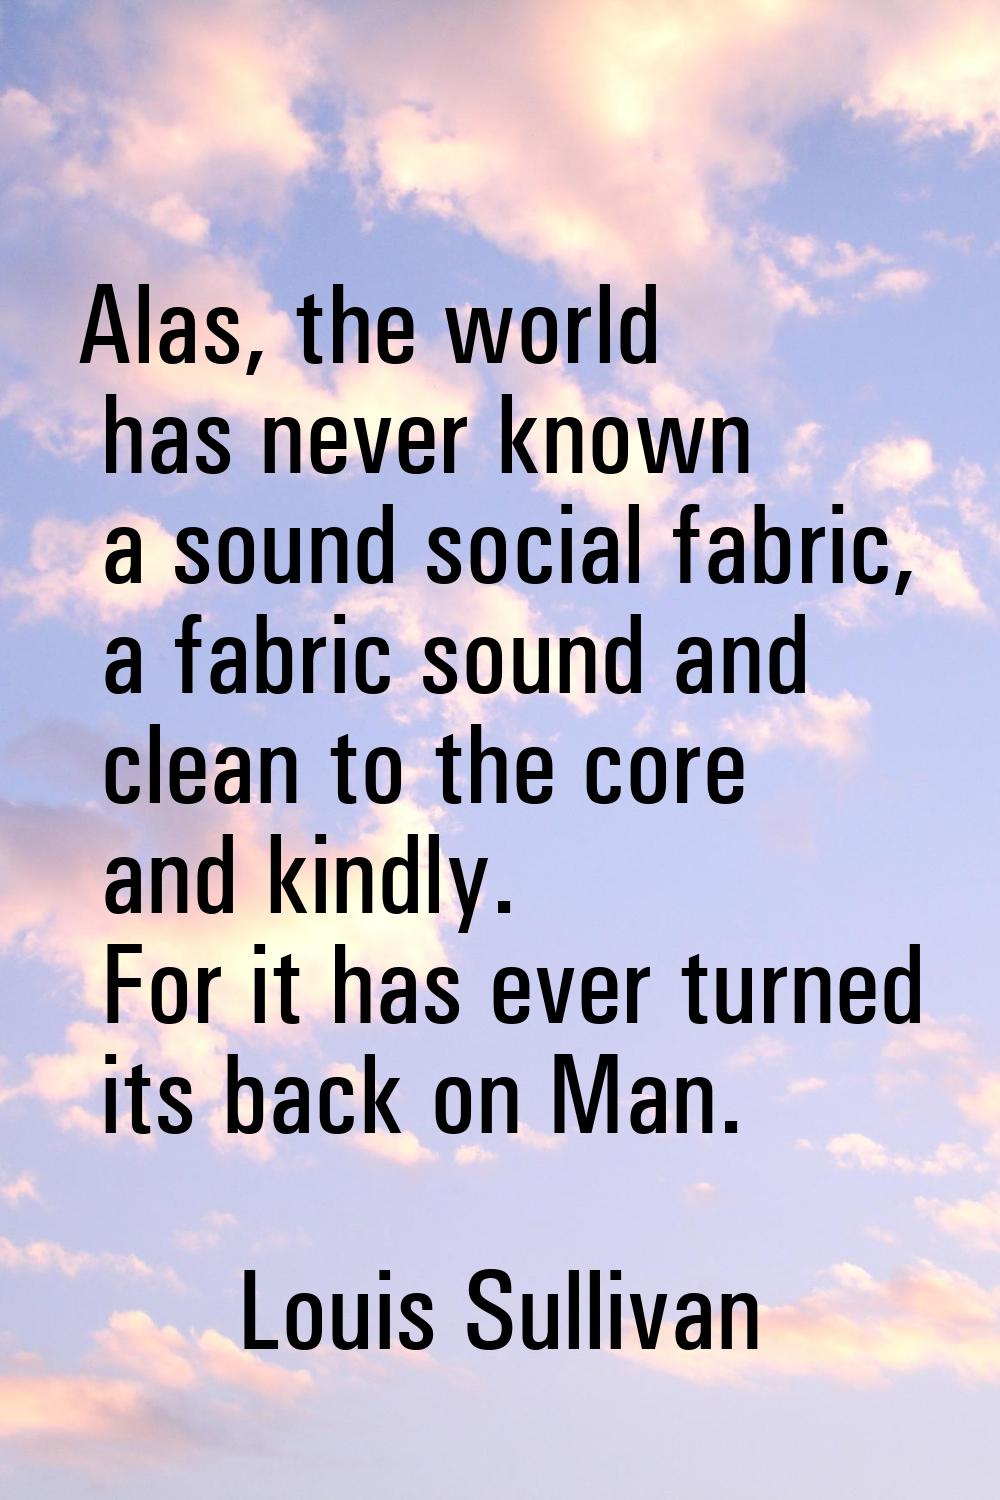 Alas, the world has never known a sound social fabric, a fabric sound and clean to the core and kin